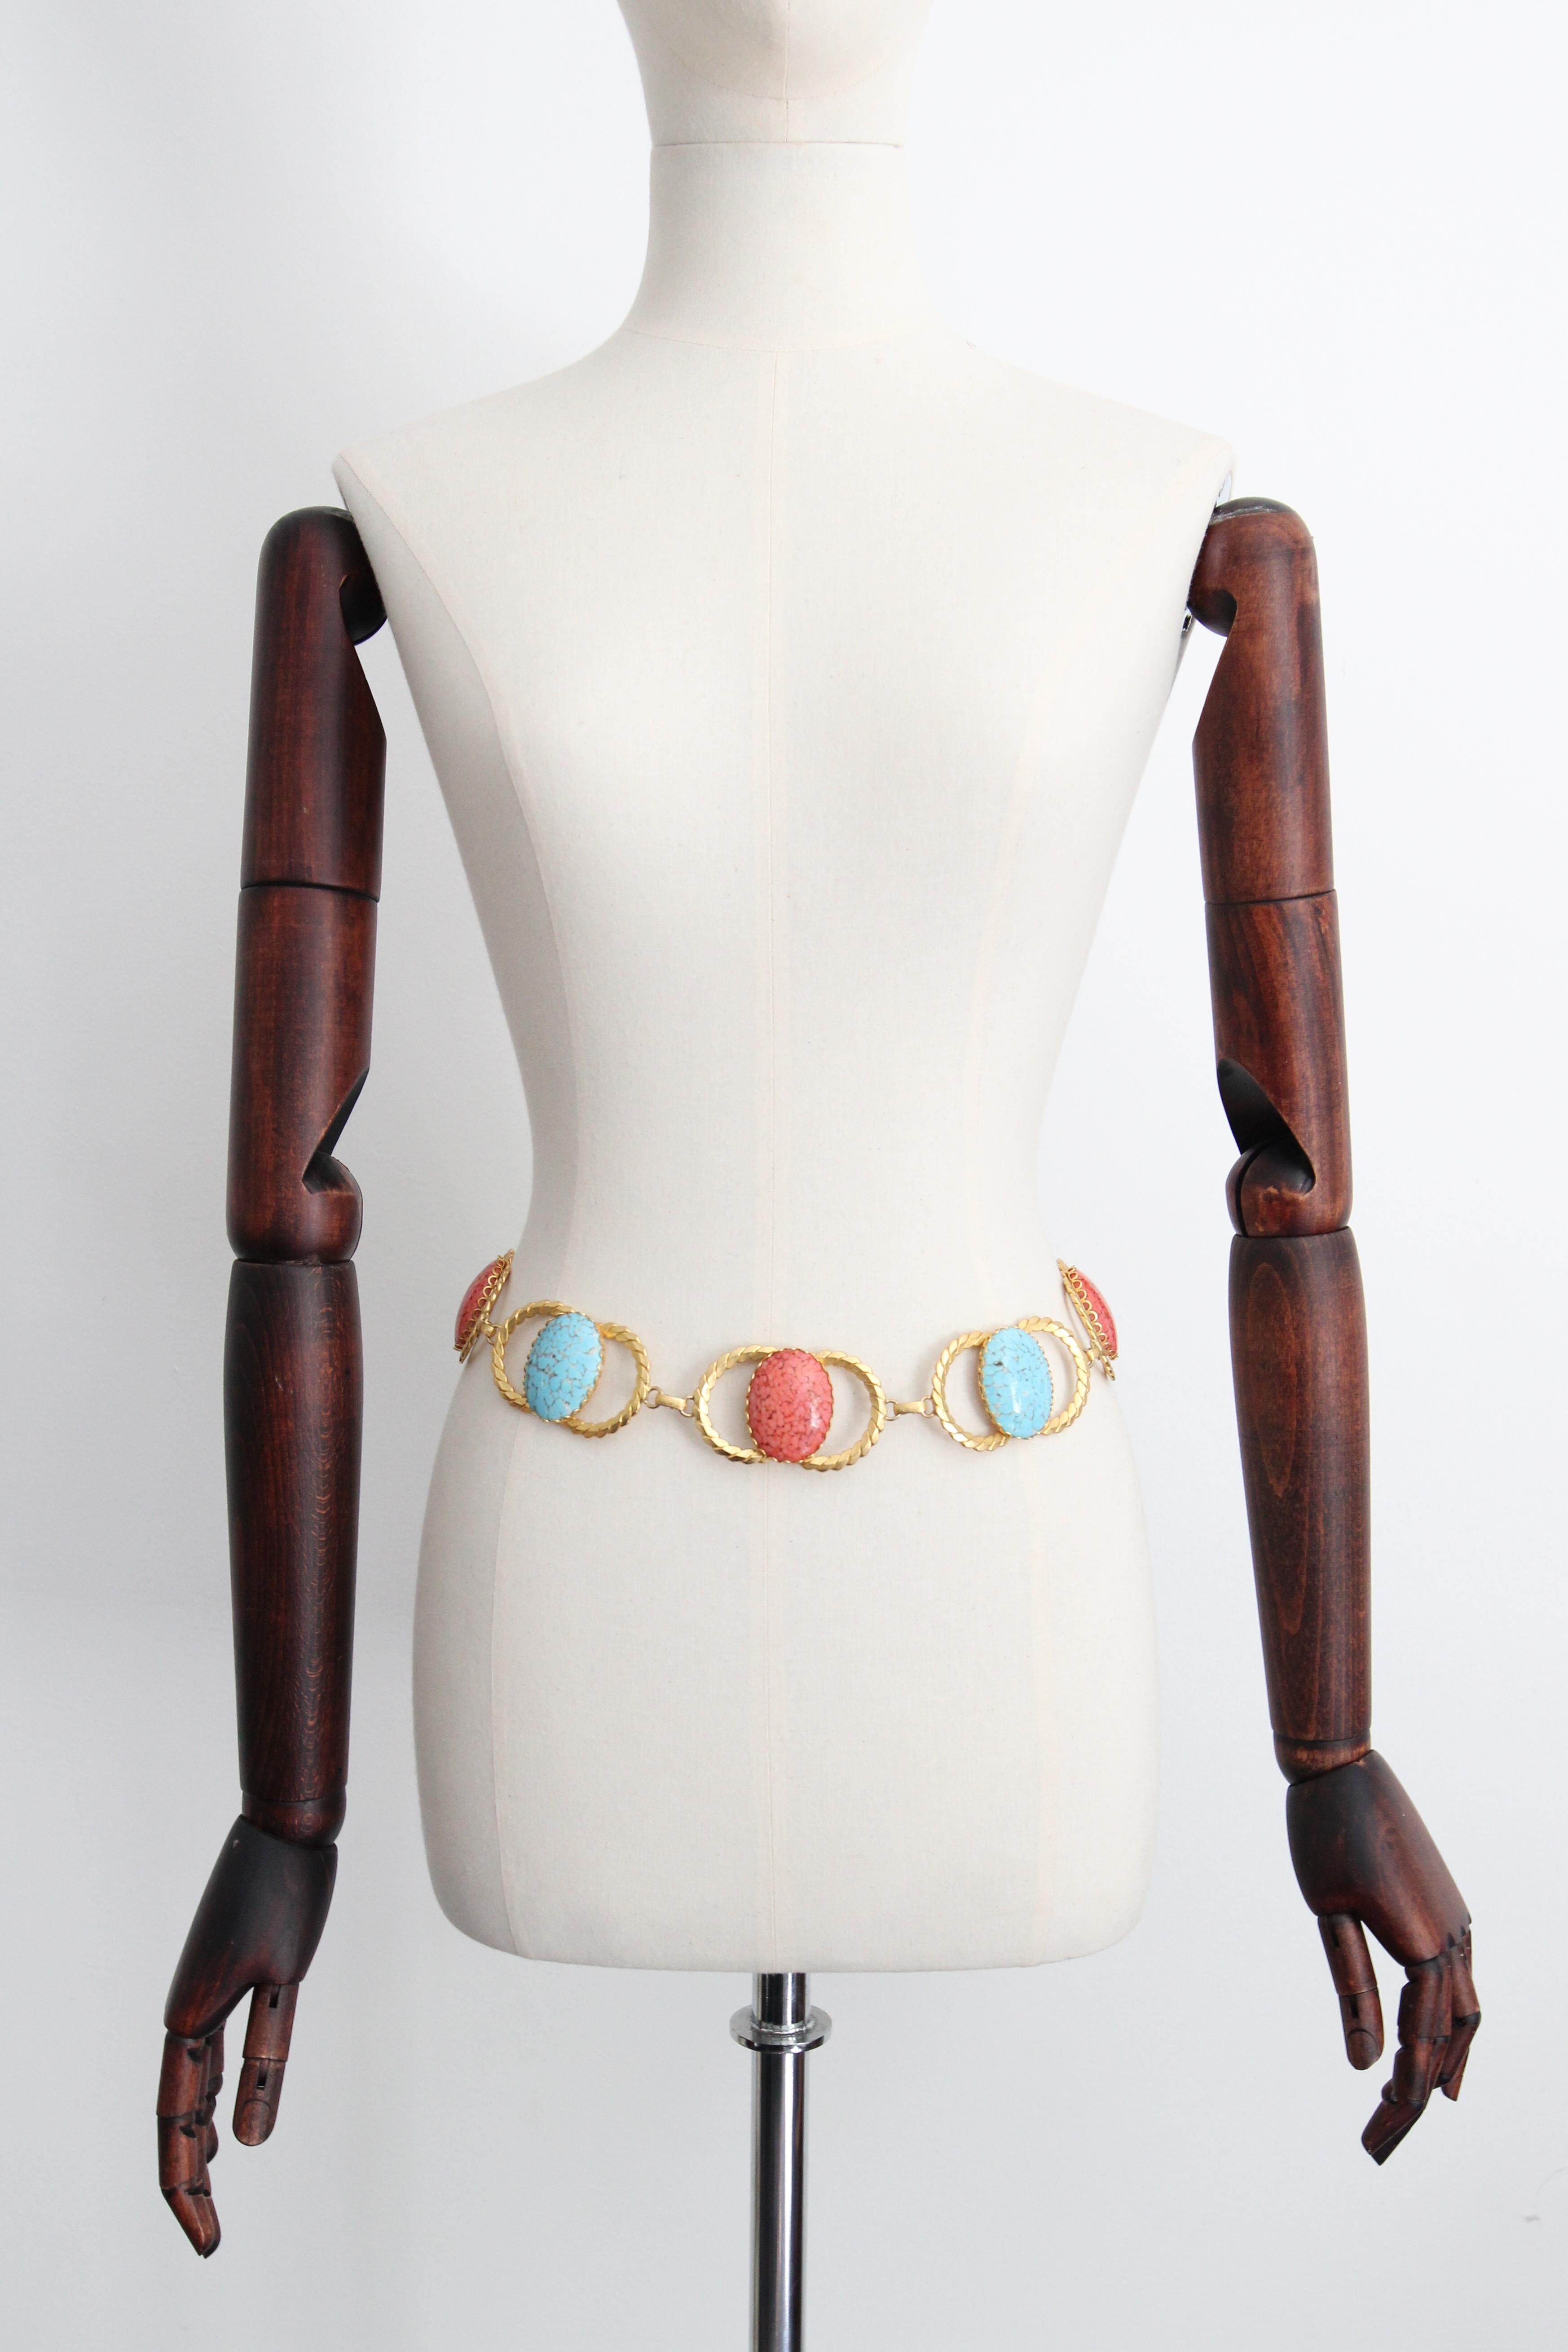 Vintage 1970's coral and turquoise glass cabochons waist chain belt UK 8 US 4 In Good Condition For Sale In Cheltenham, GB